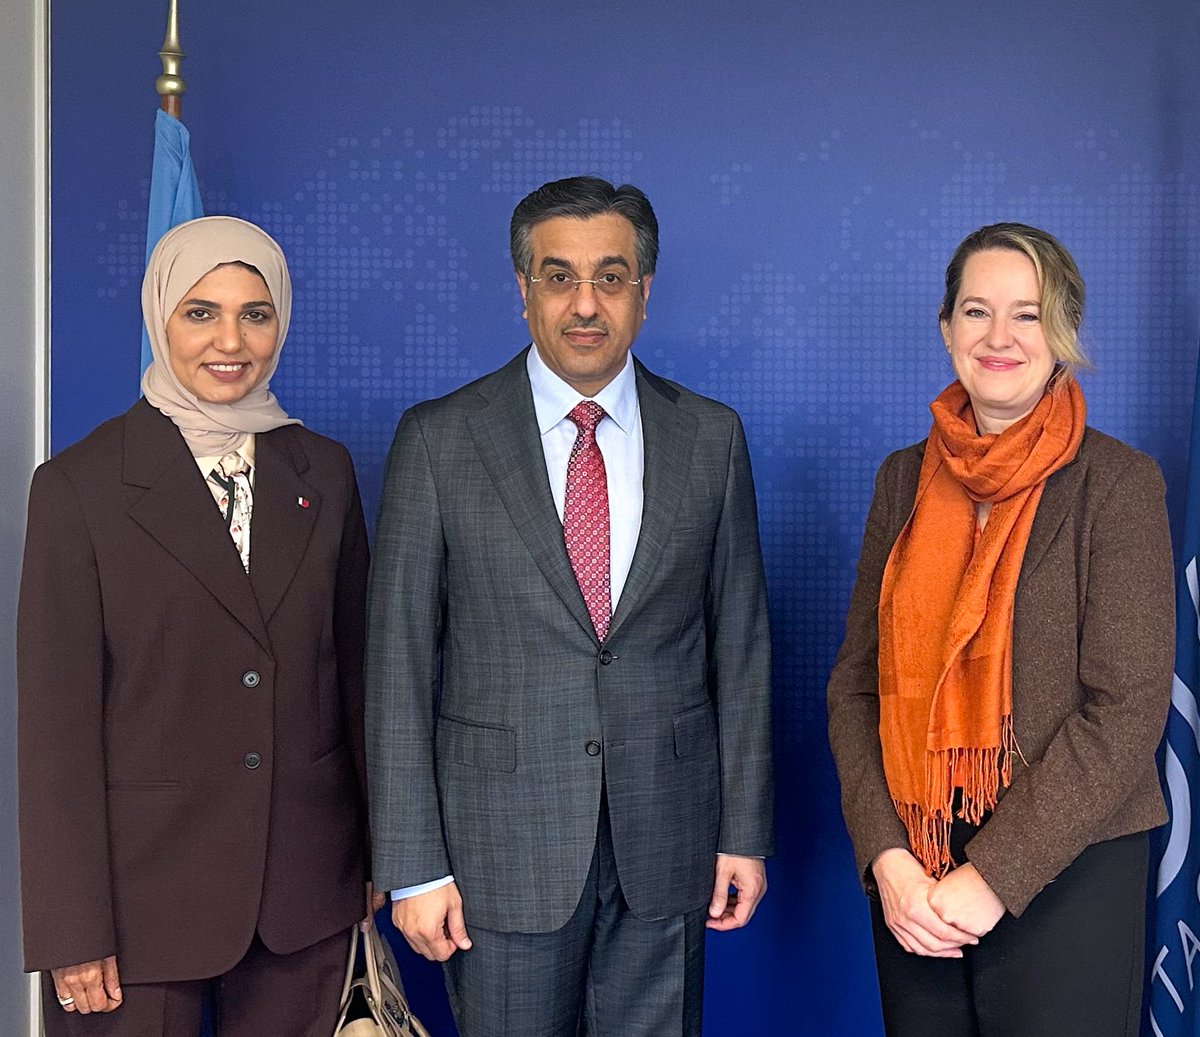 Today in Geneva, I discussed with H.E Mrs. Amy Pope, the Director General of the International Organization for Migration, methods to improve the collaborative efforts between the State of Qatar and the organization. Additionally, I conveyed my best wishes for her success in her